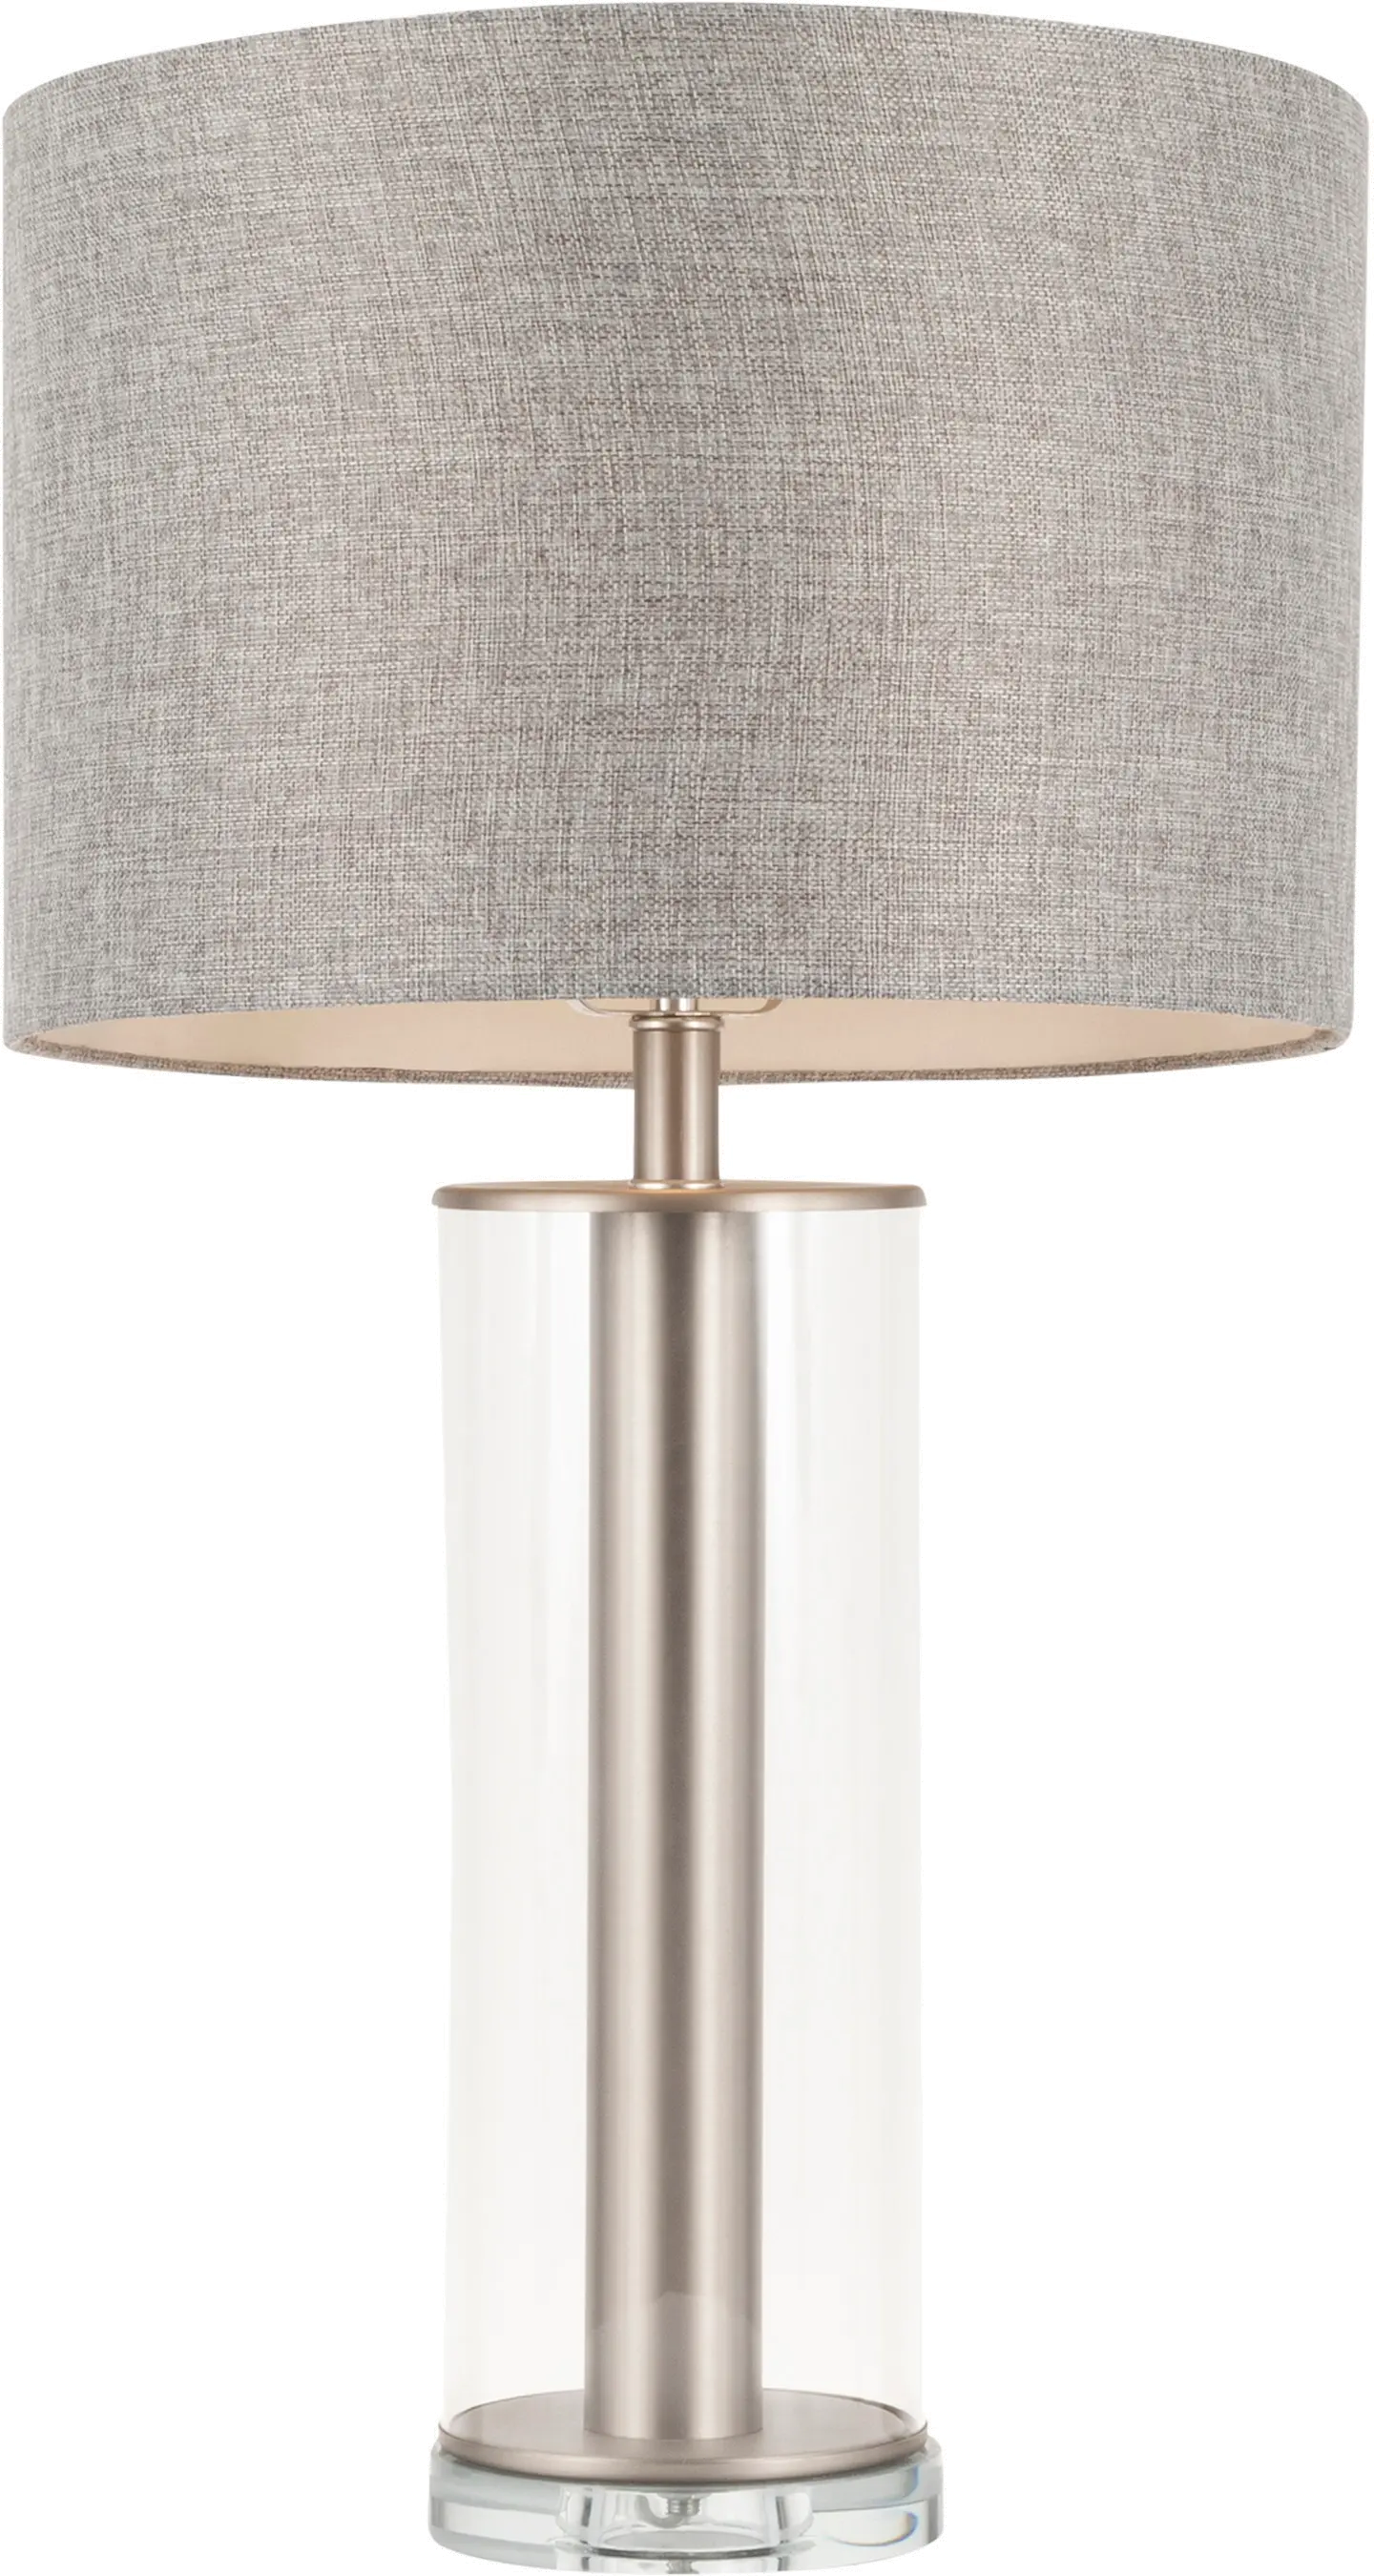 Brushed Nickel Metal Table Lamp with Glass Base - Glacier